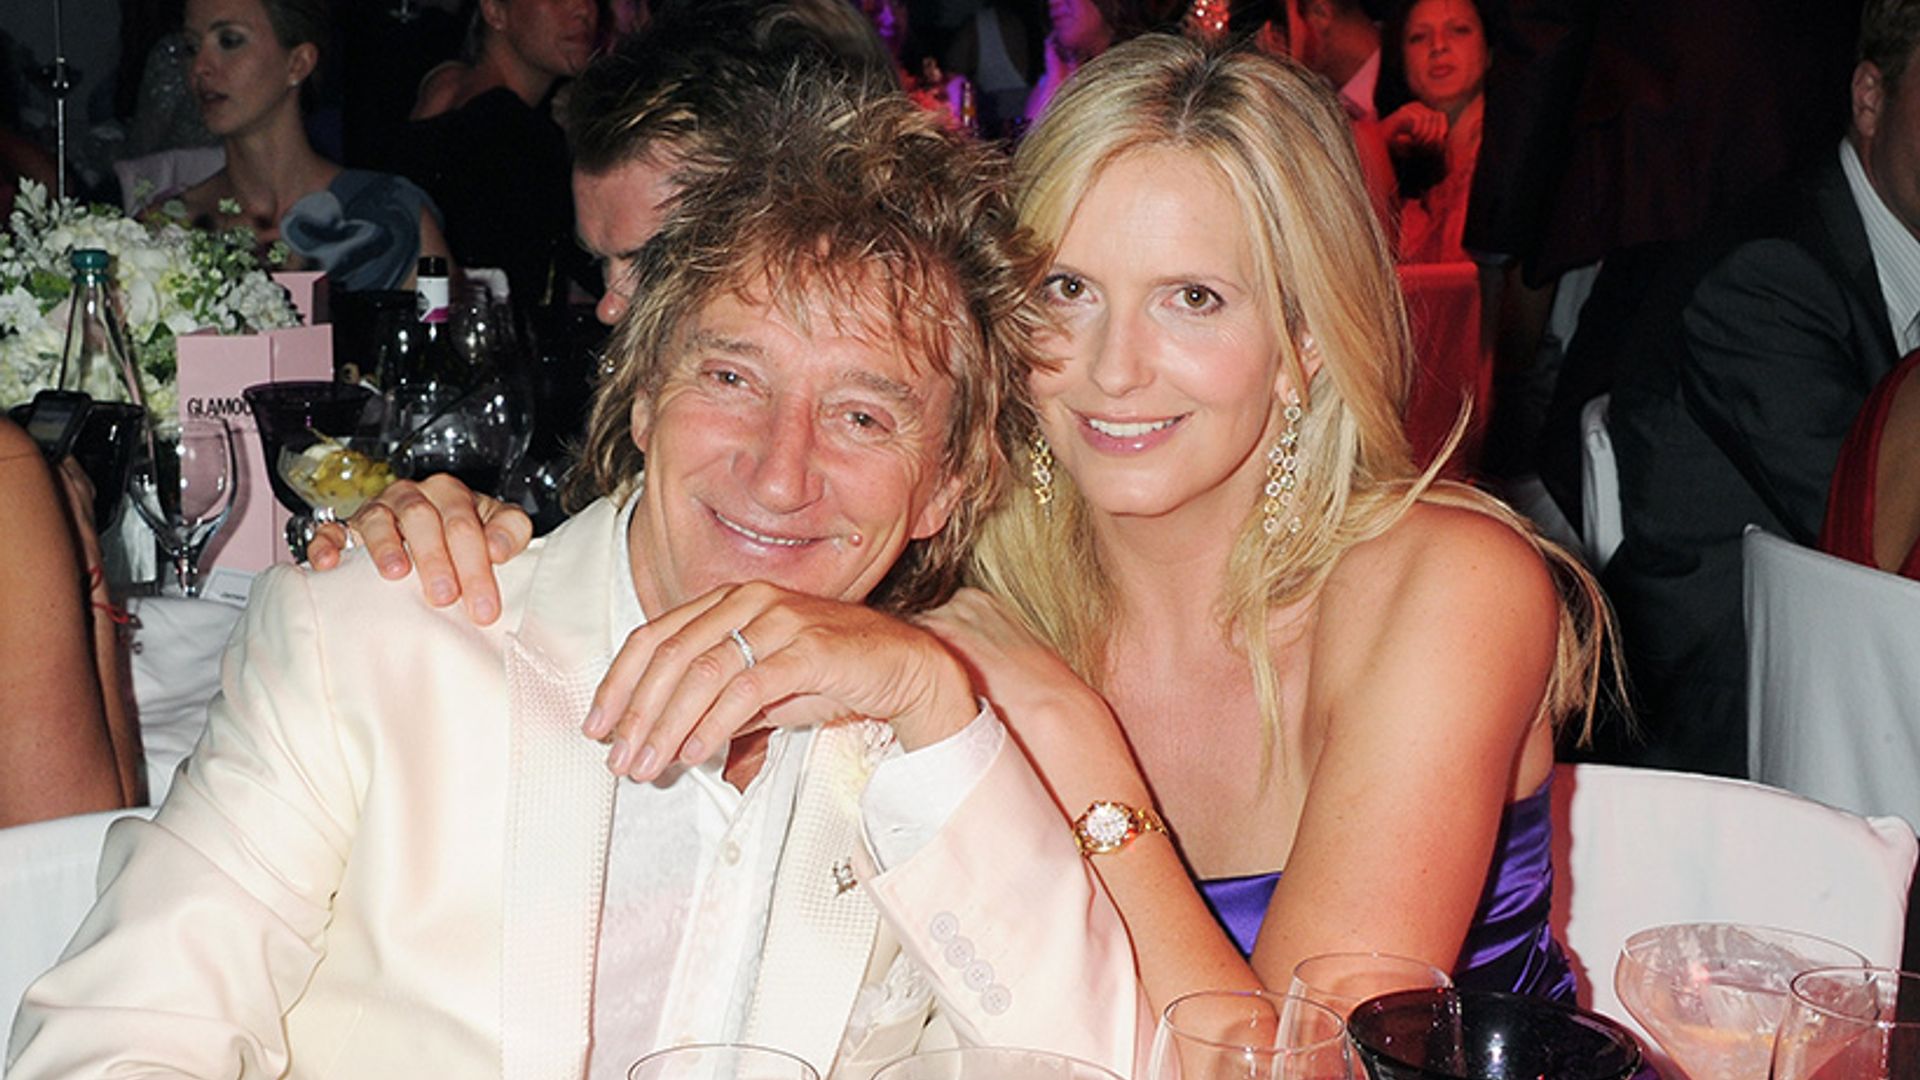 Penny Lancaster opens up about renewing her wedding vows in 'beautiful' ceremony